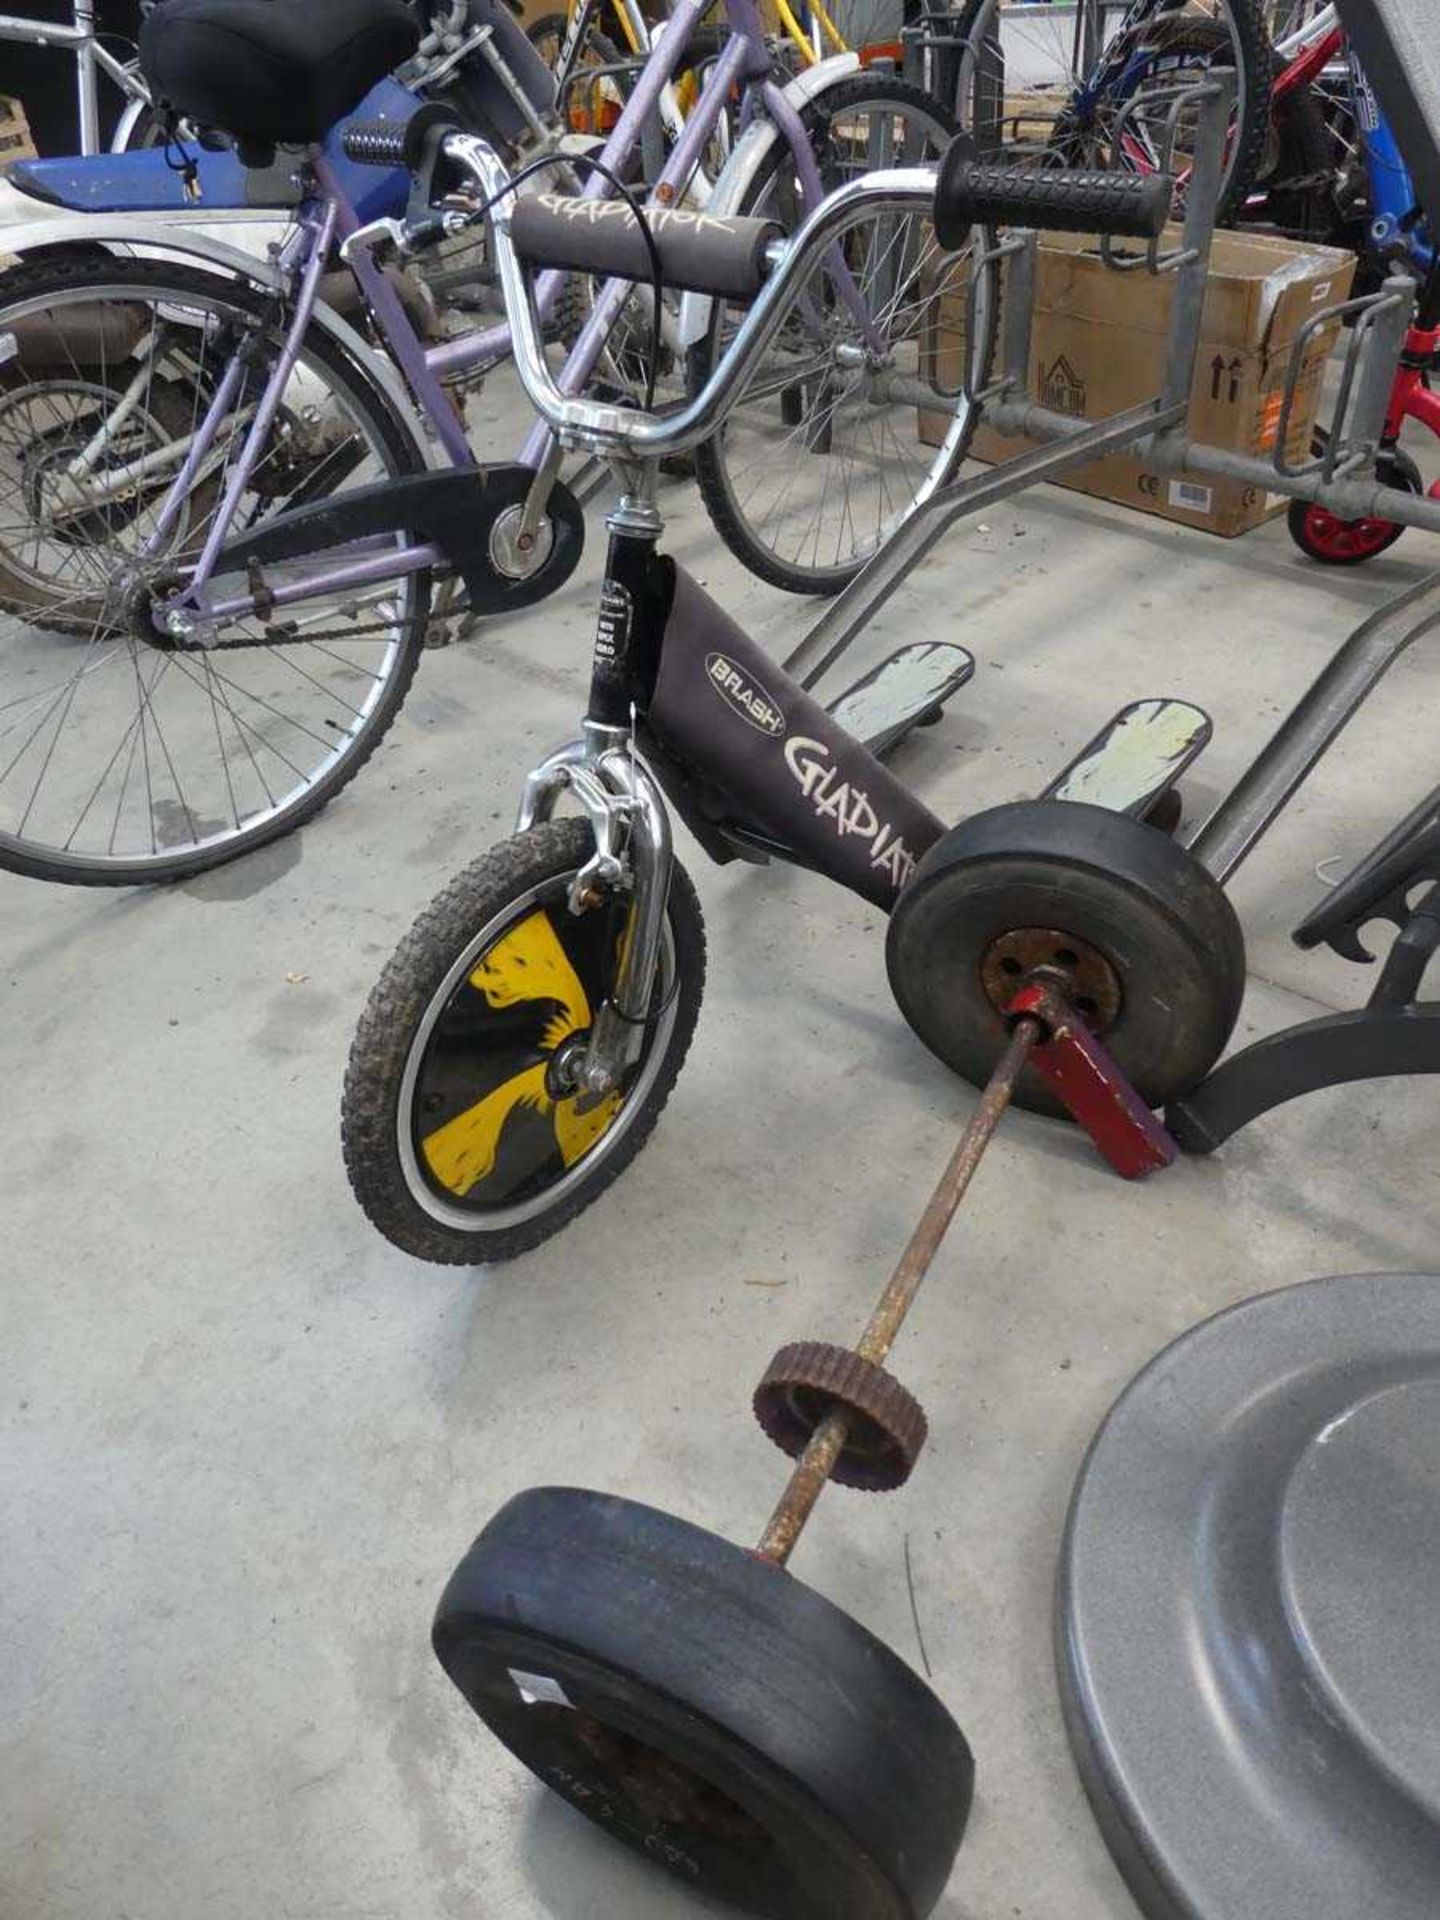 Gladiator wiggle scooter and set of wheels